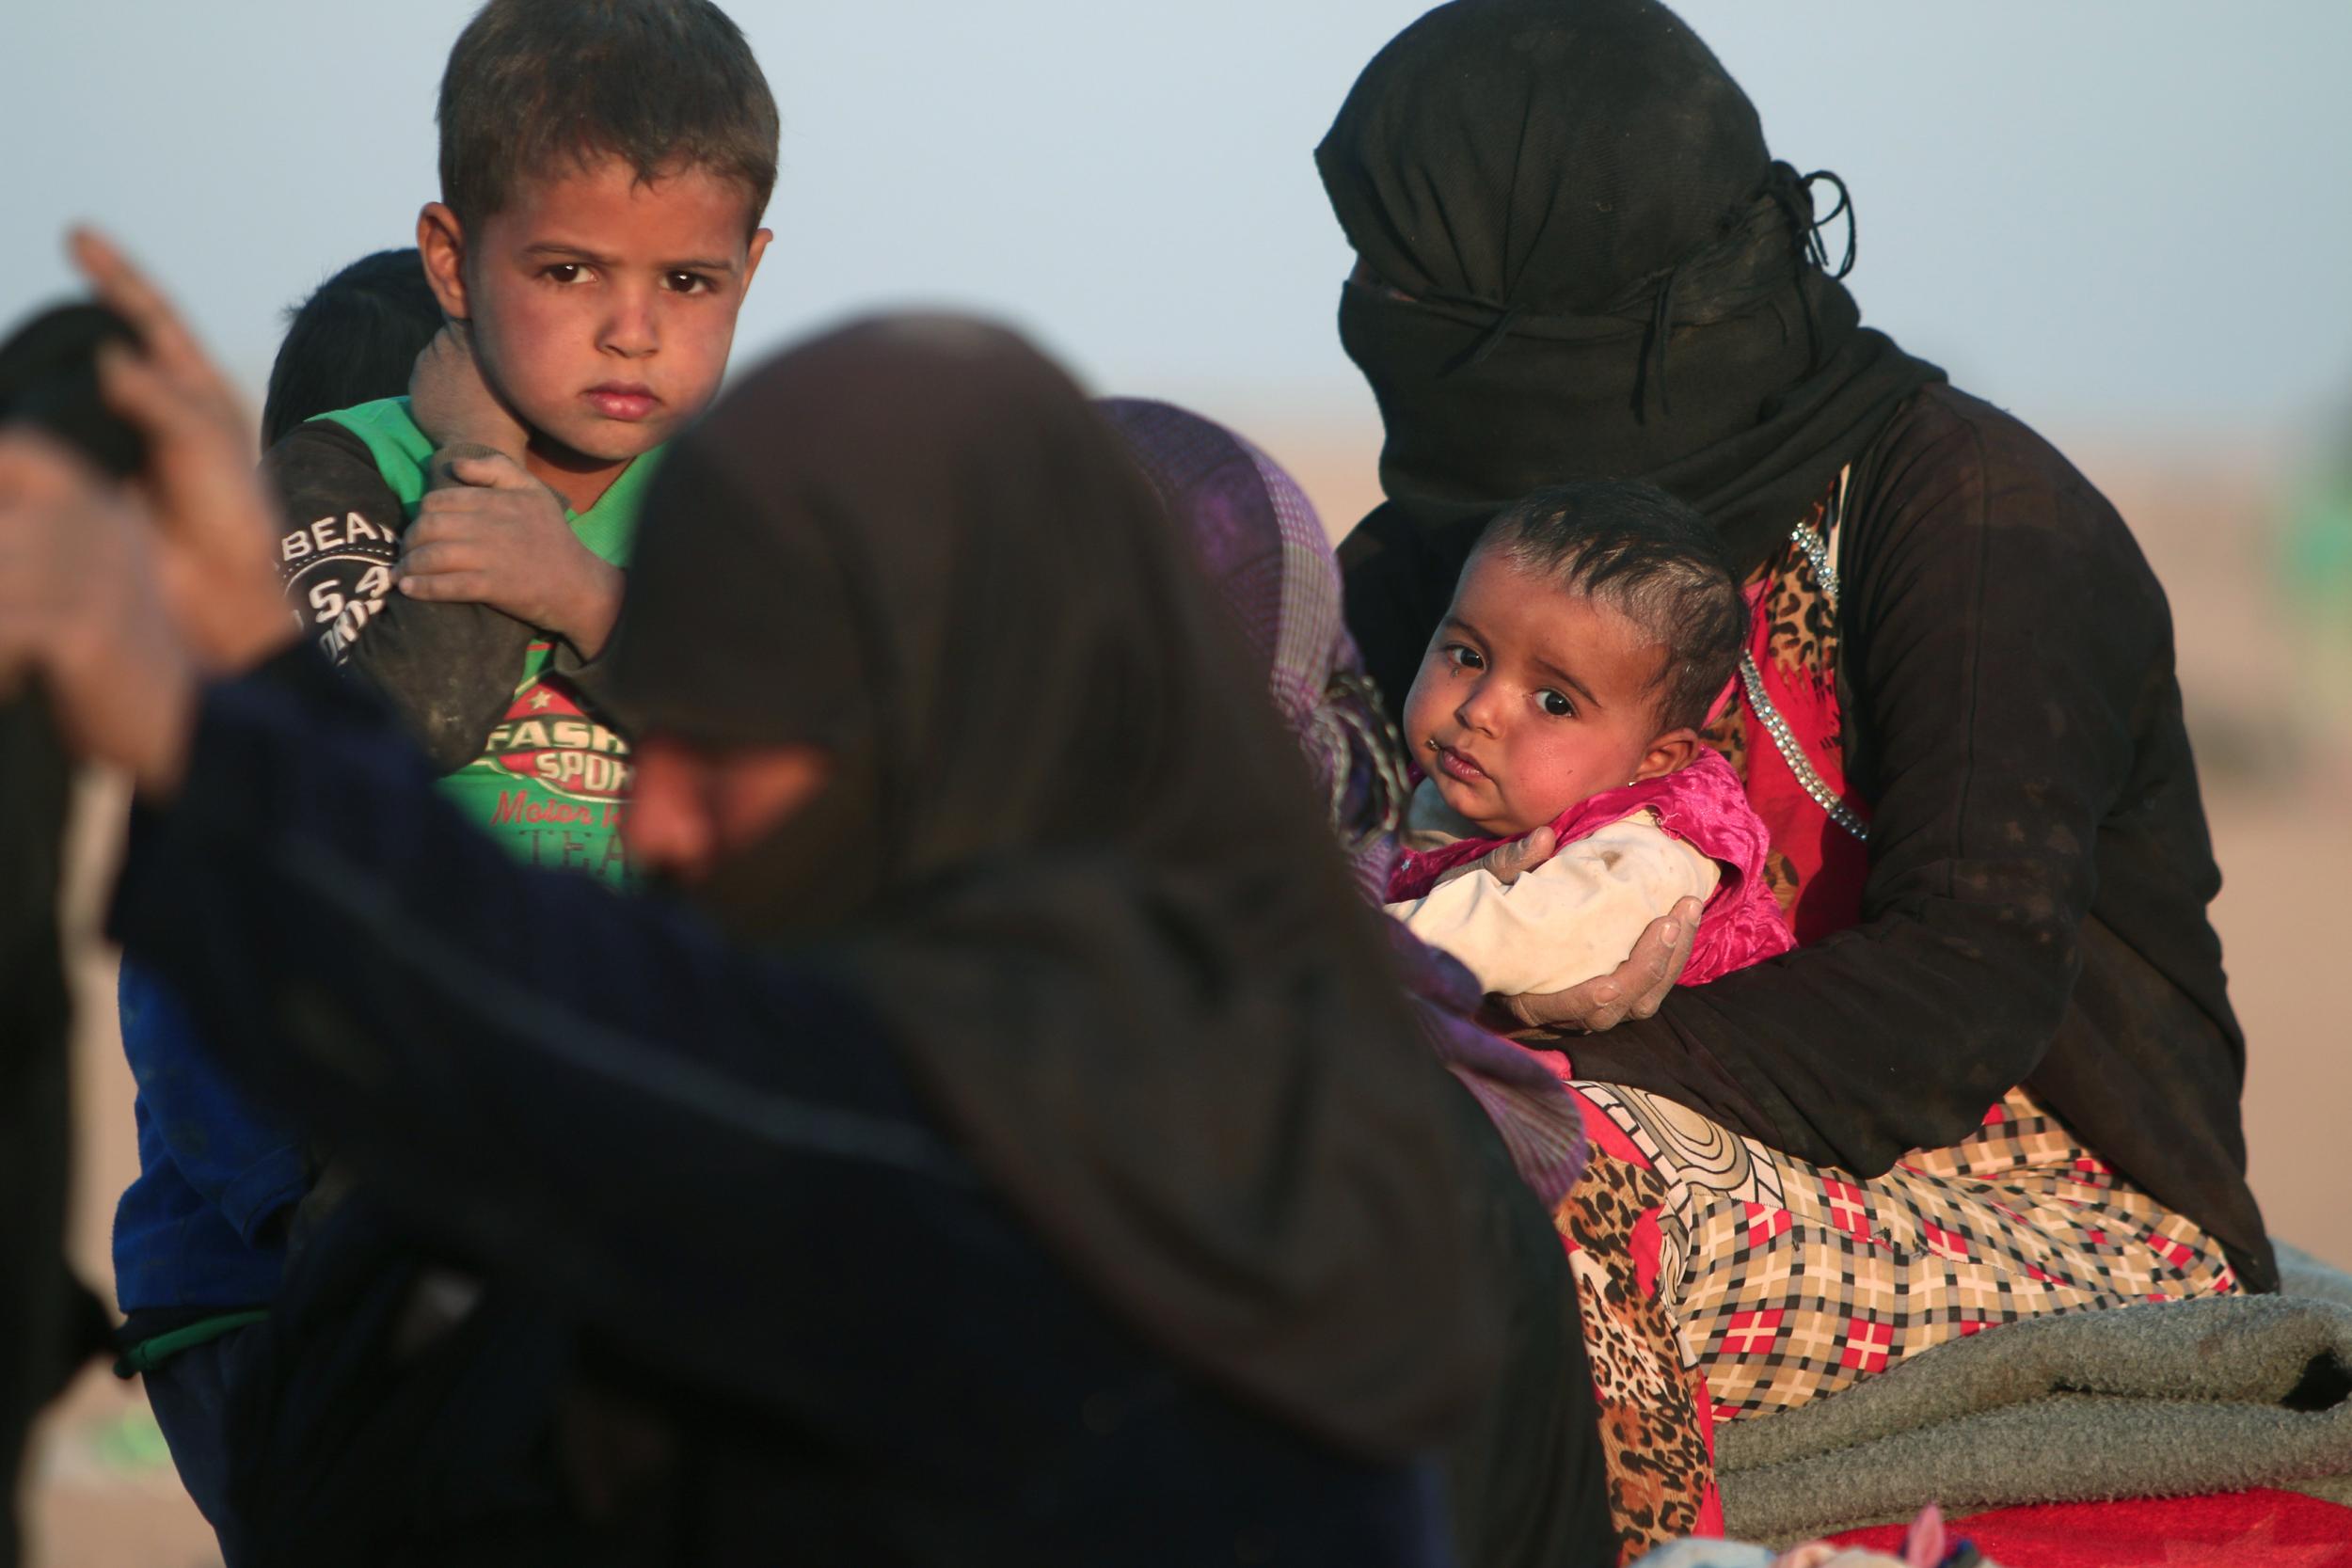 Women and children who fled violence in Mosul gather in Hasaka Governorate, just over the border in Syria, on 20 October 2016